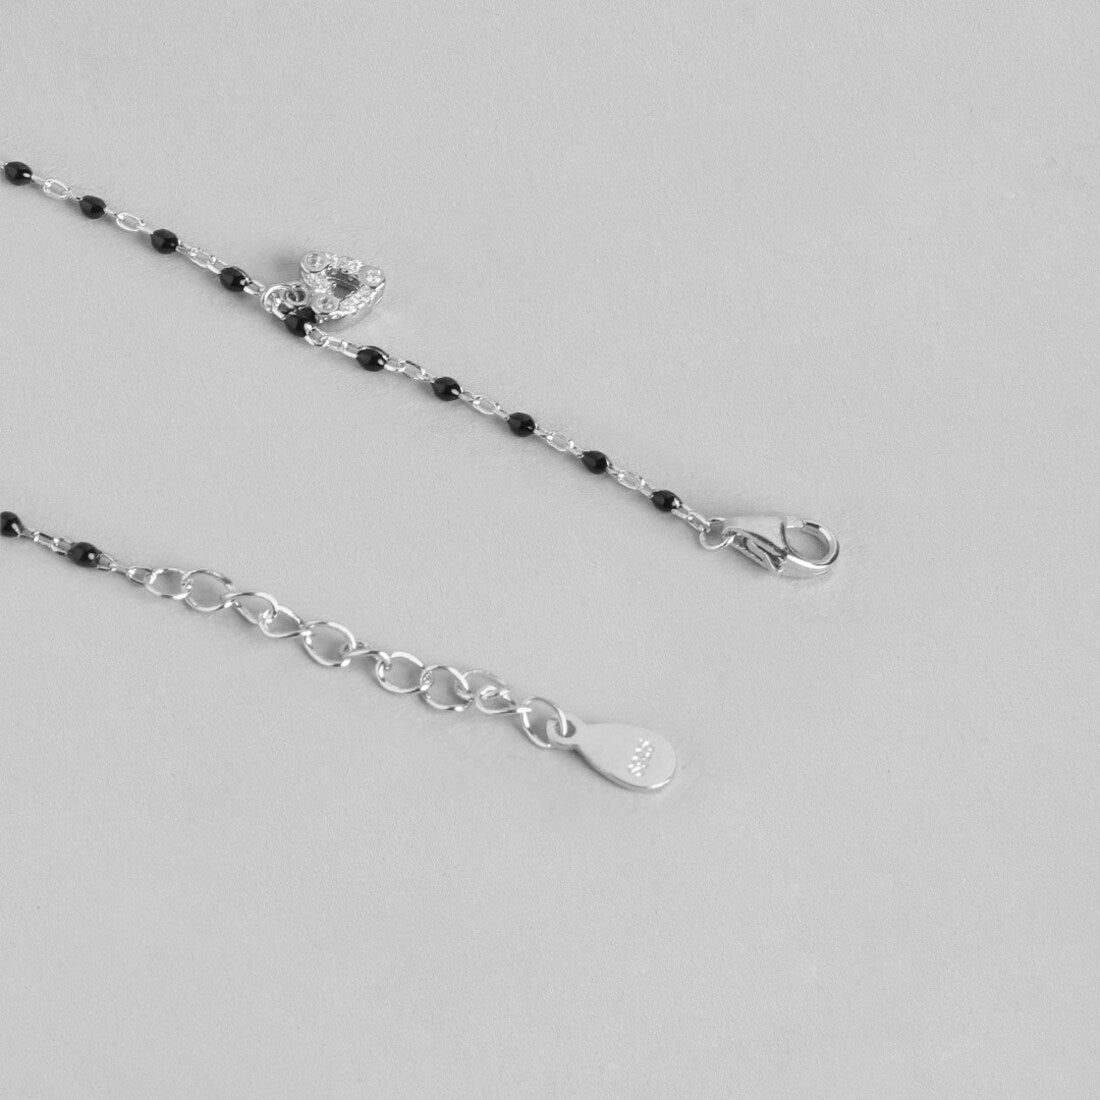 Black Beads with Heart Charms 925 Sterling Silver Anklet